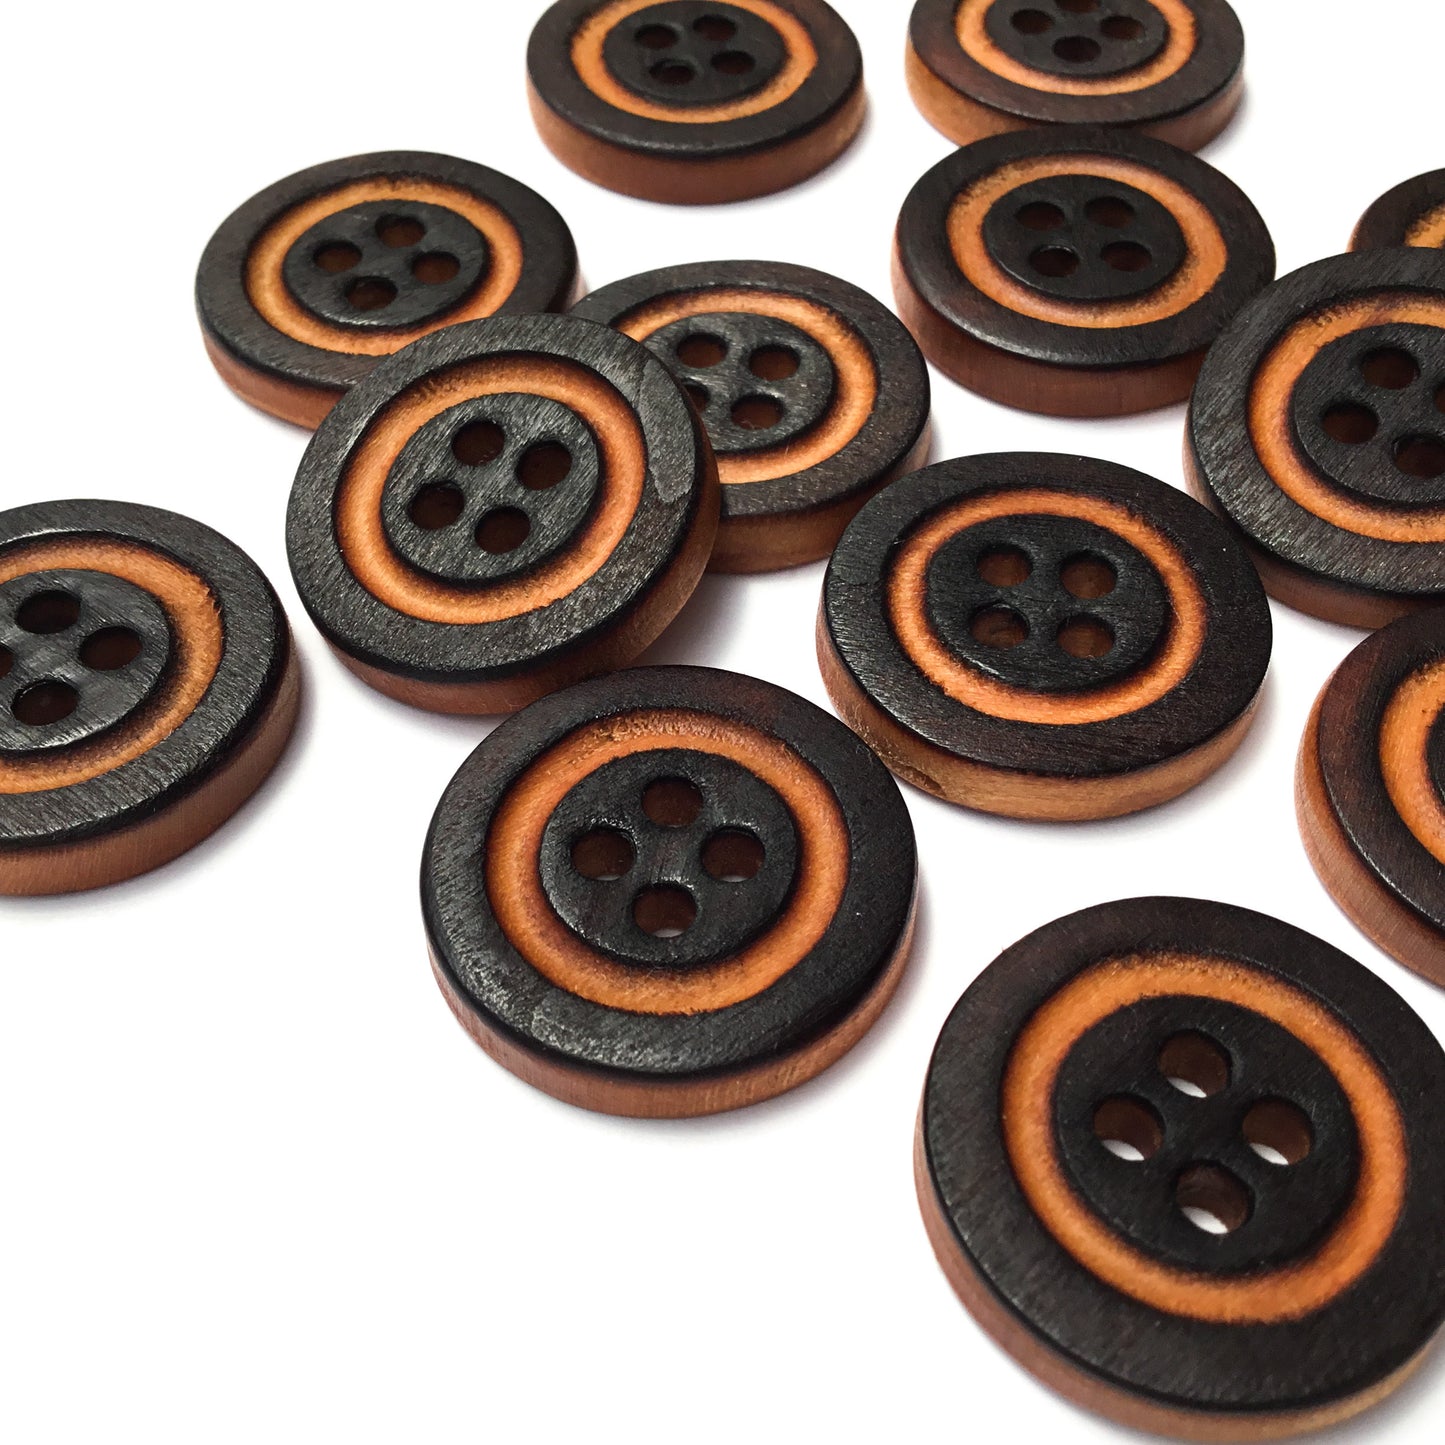 Four Hole Inset Ring Button - Blackened Cherry Wood  1"